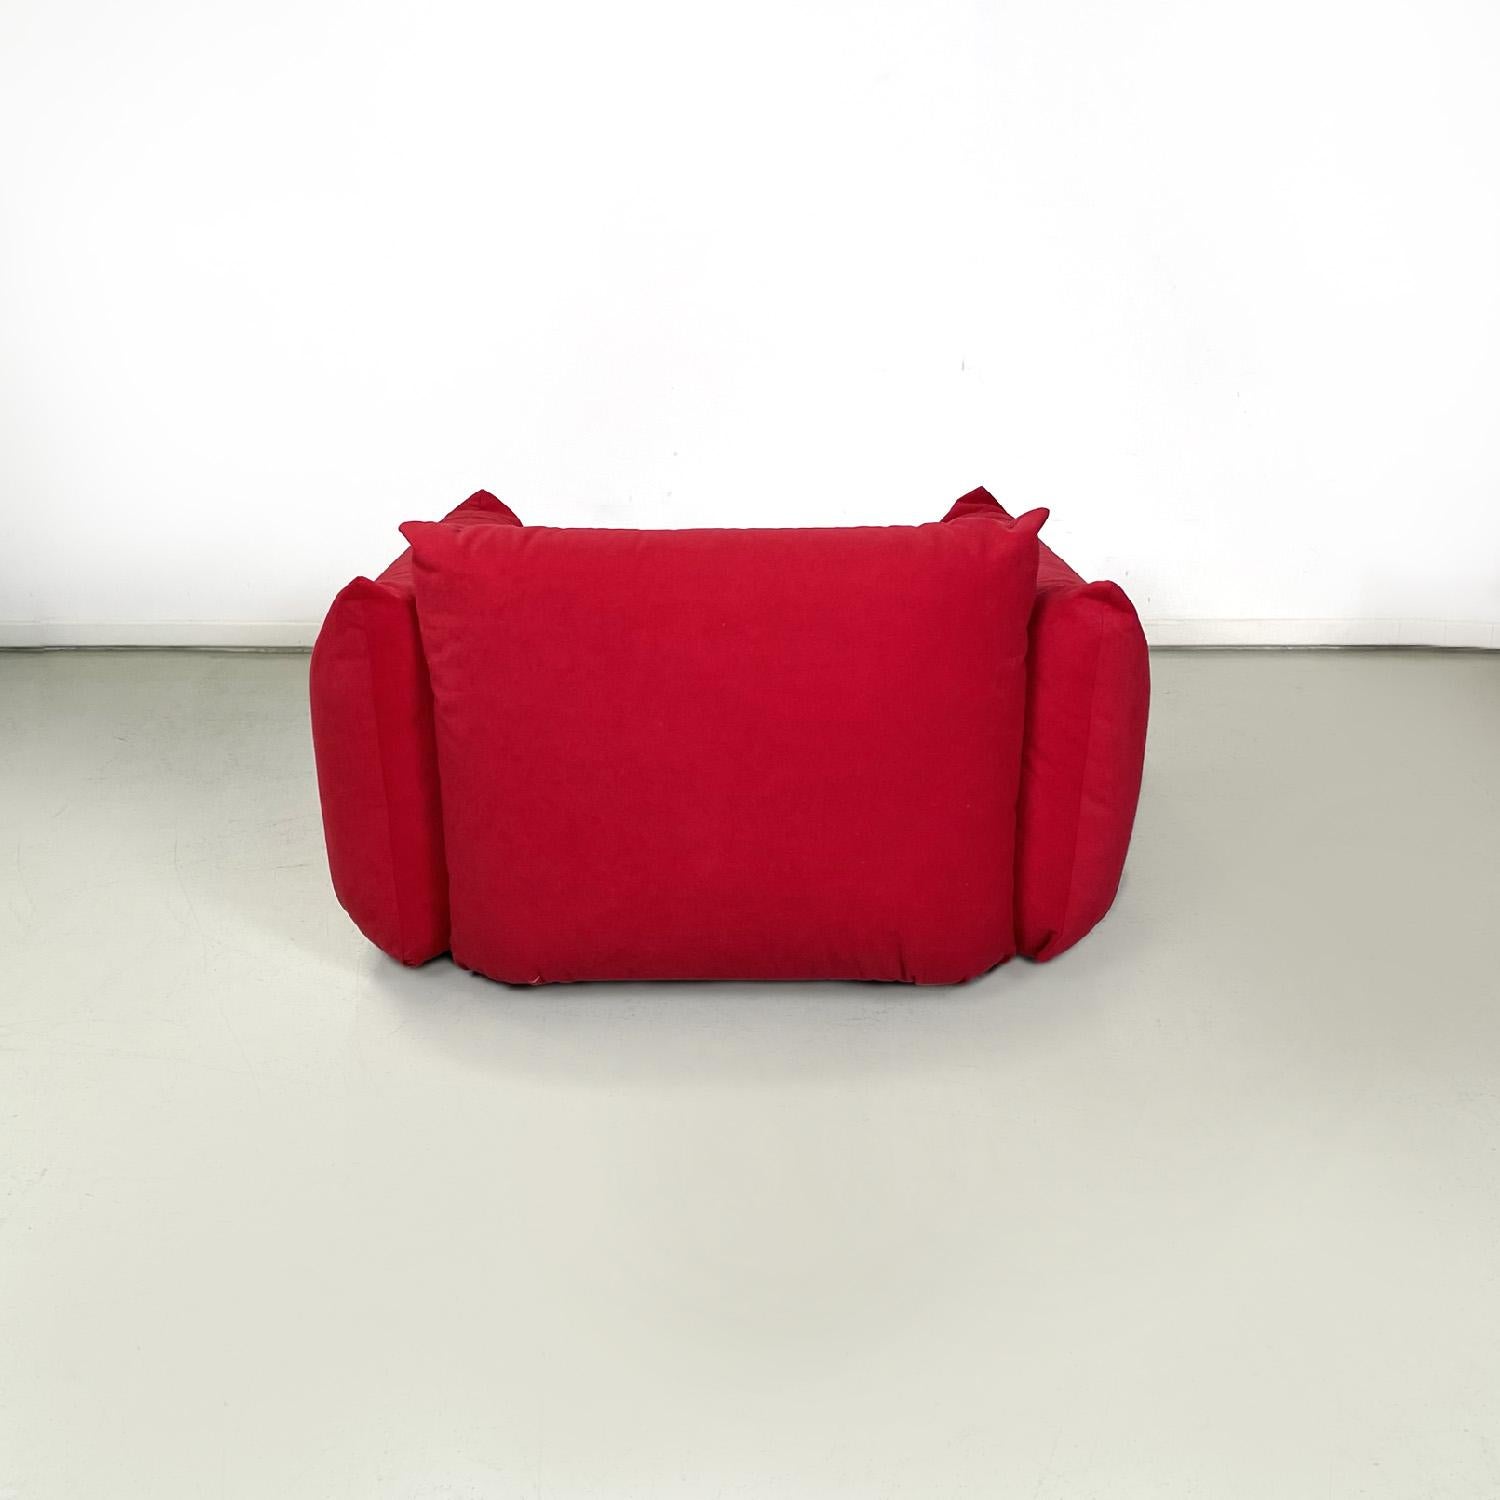 Italian modern red living room Marenco by Mario Marenco for Arflex, 1970s For Sale 1